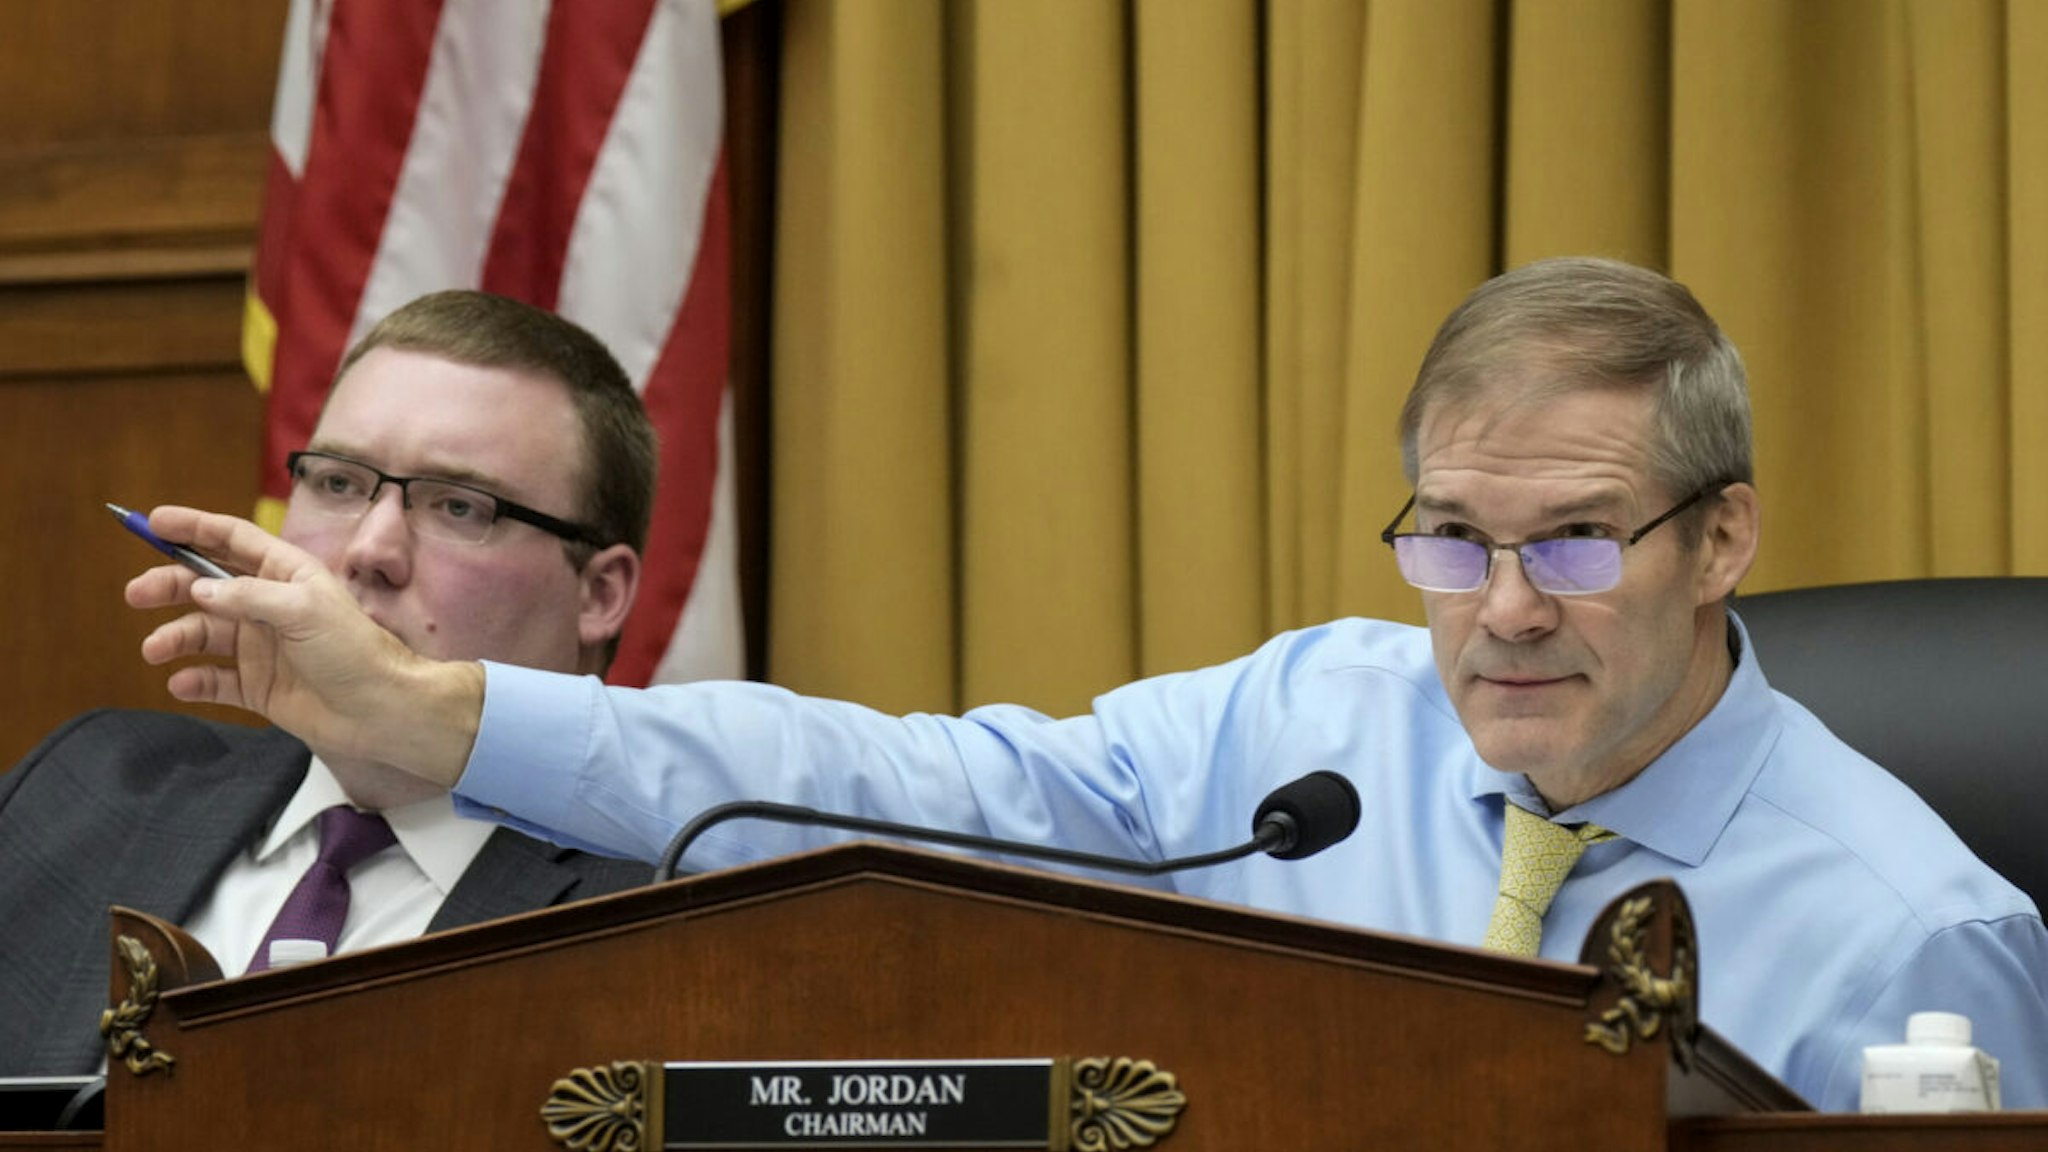 U.S. Rep. Jim Jordan (R-OH), Chairman of the House Judiciary Committee, presides over a business meeting prior to a hearing on U.S. southern border security on Capitol Hill, February 01, 2023 in Washington, DC.